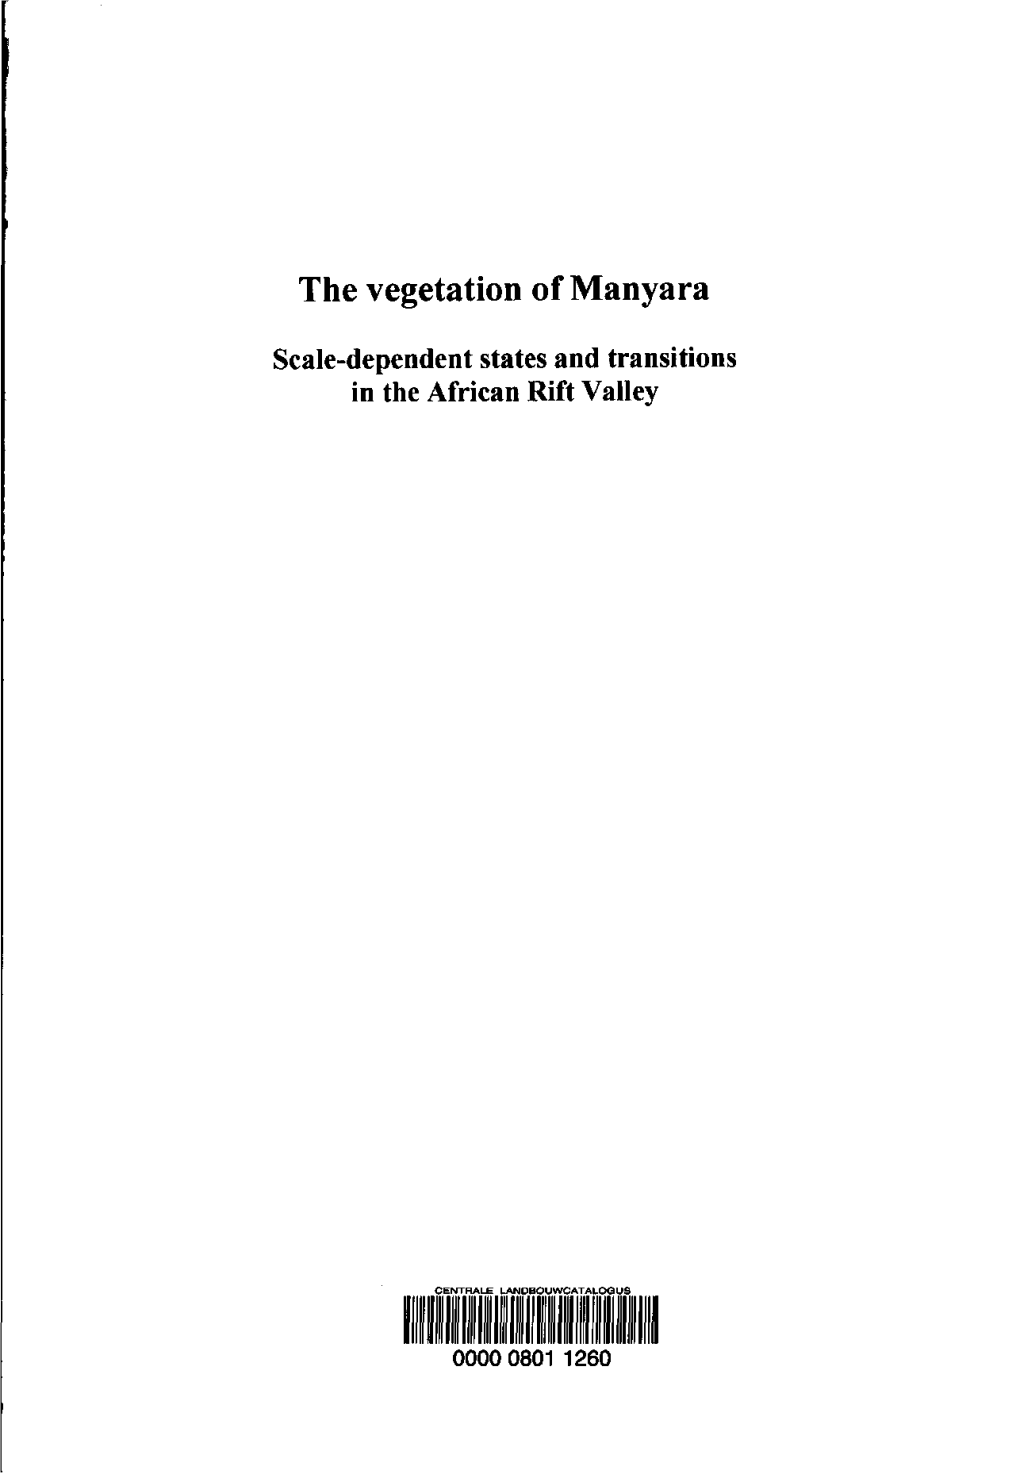 The Vegetation of Manyara: Scale-Dependent States Andtransition S Inth Eafrica N Rift Valley'